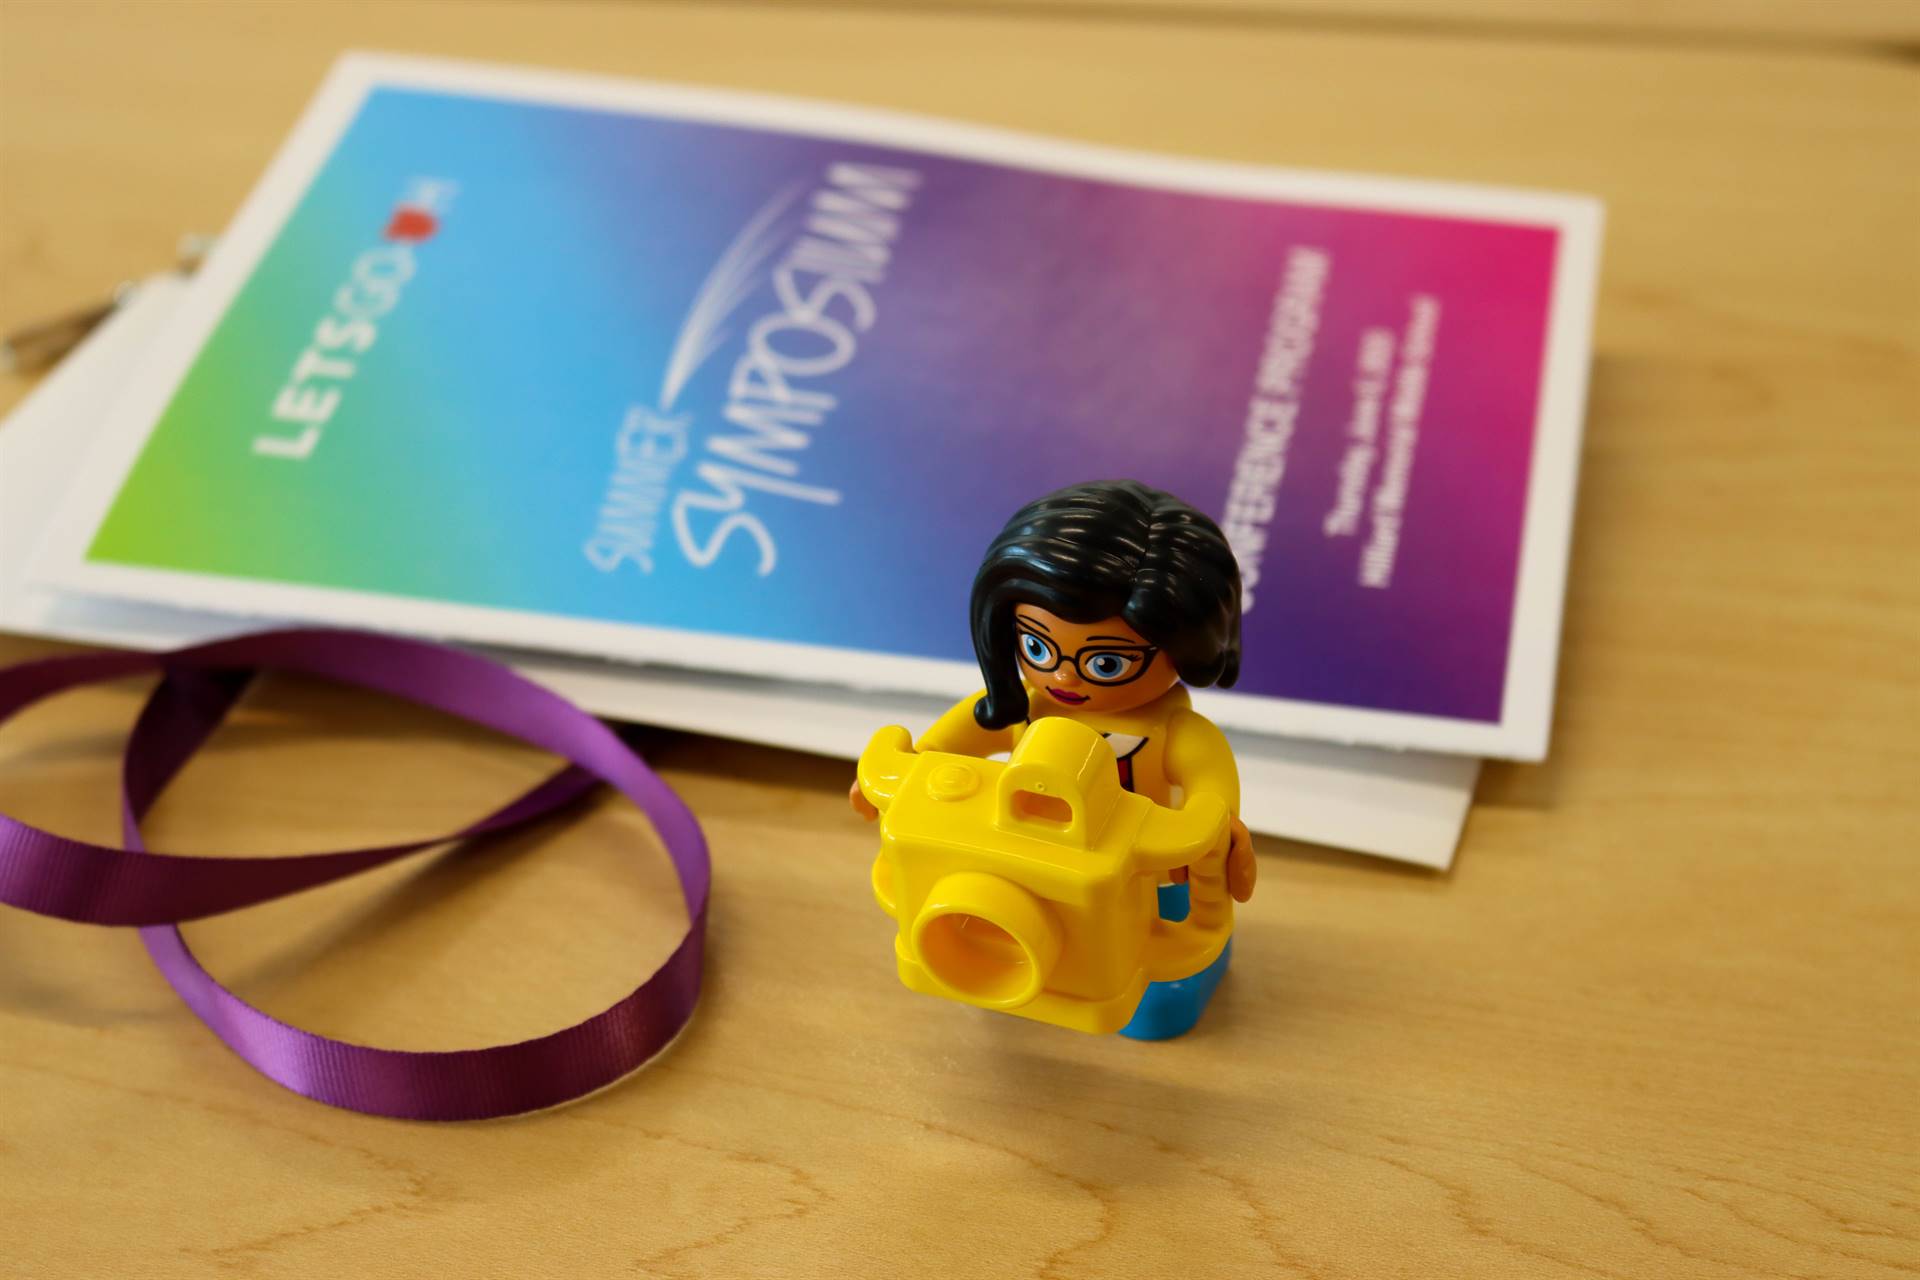 LETS GO OHIO Summer Symposium session schedule pamphlet and lego holding a camera